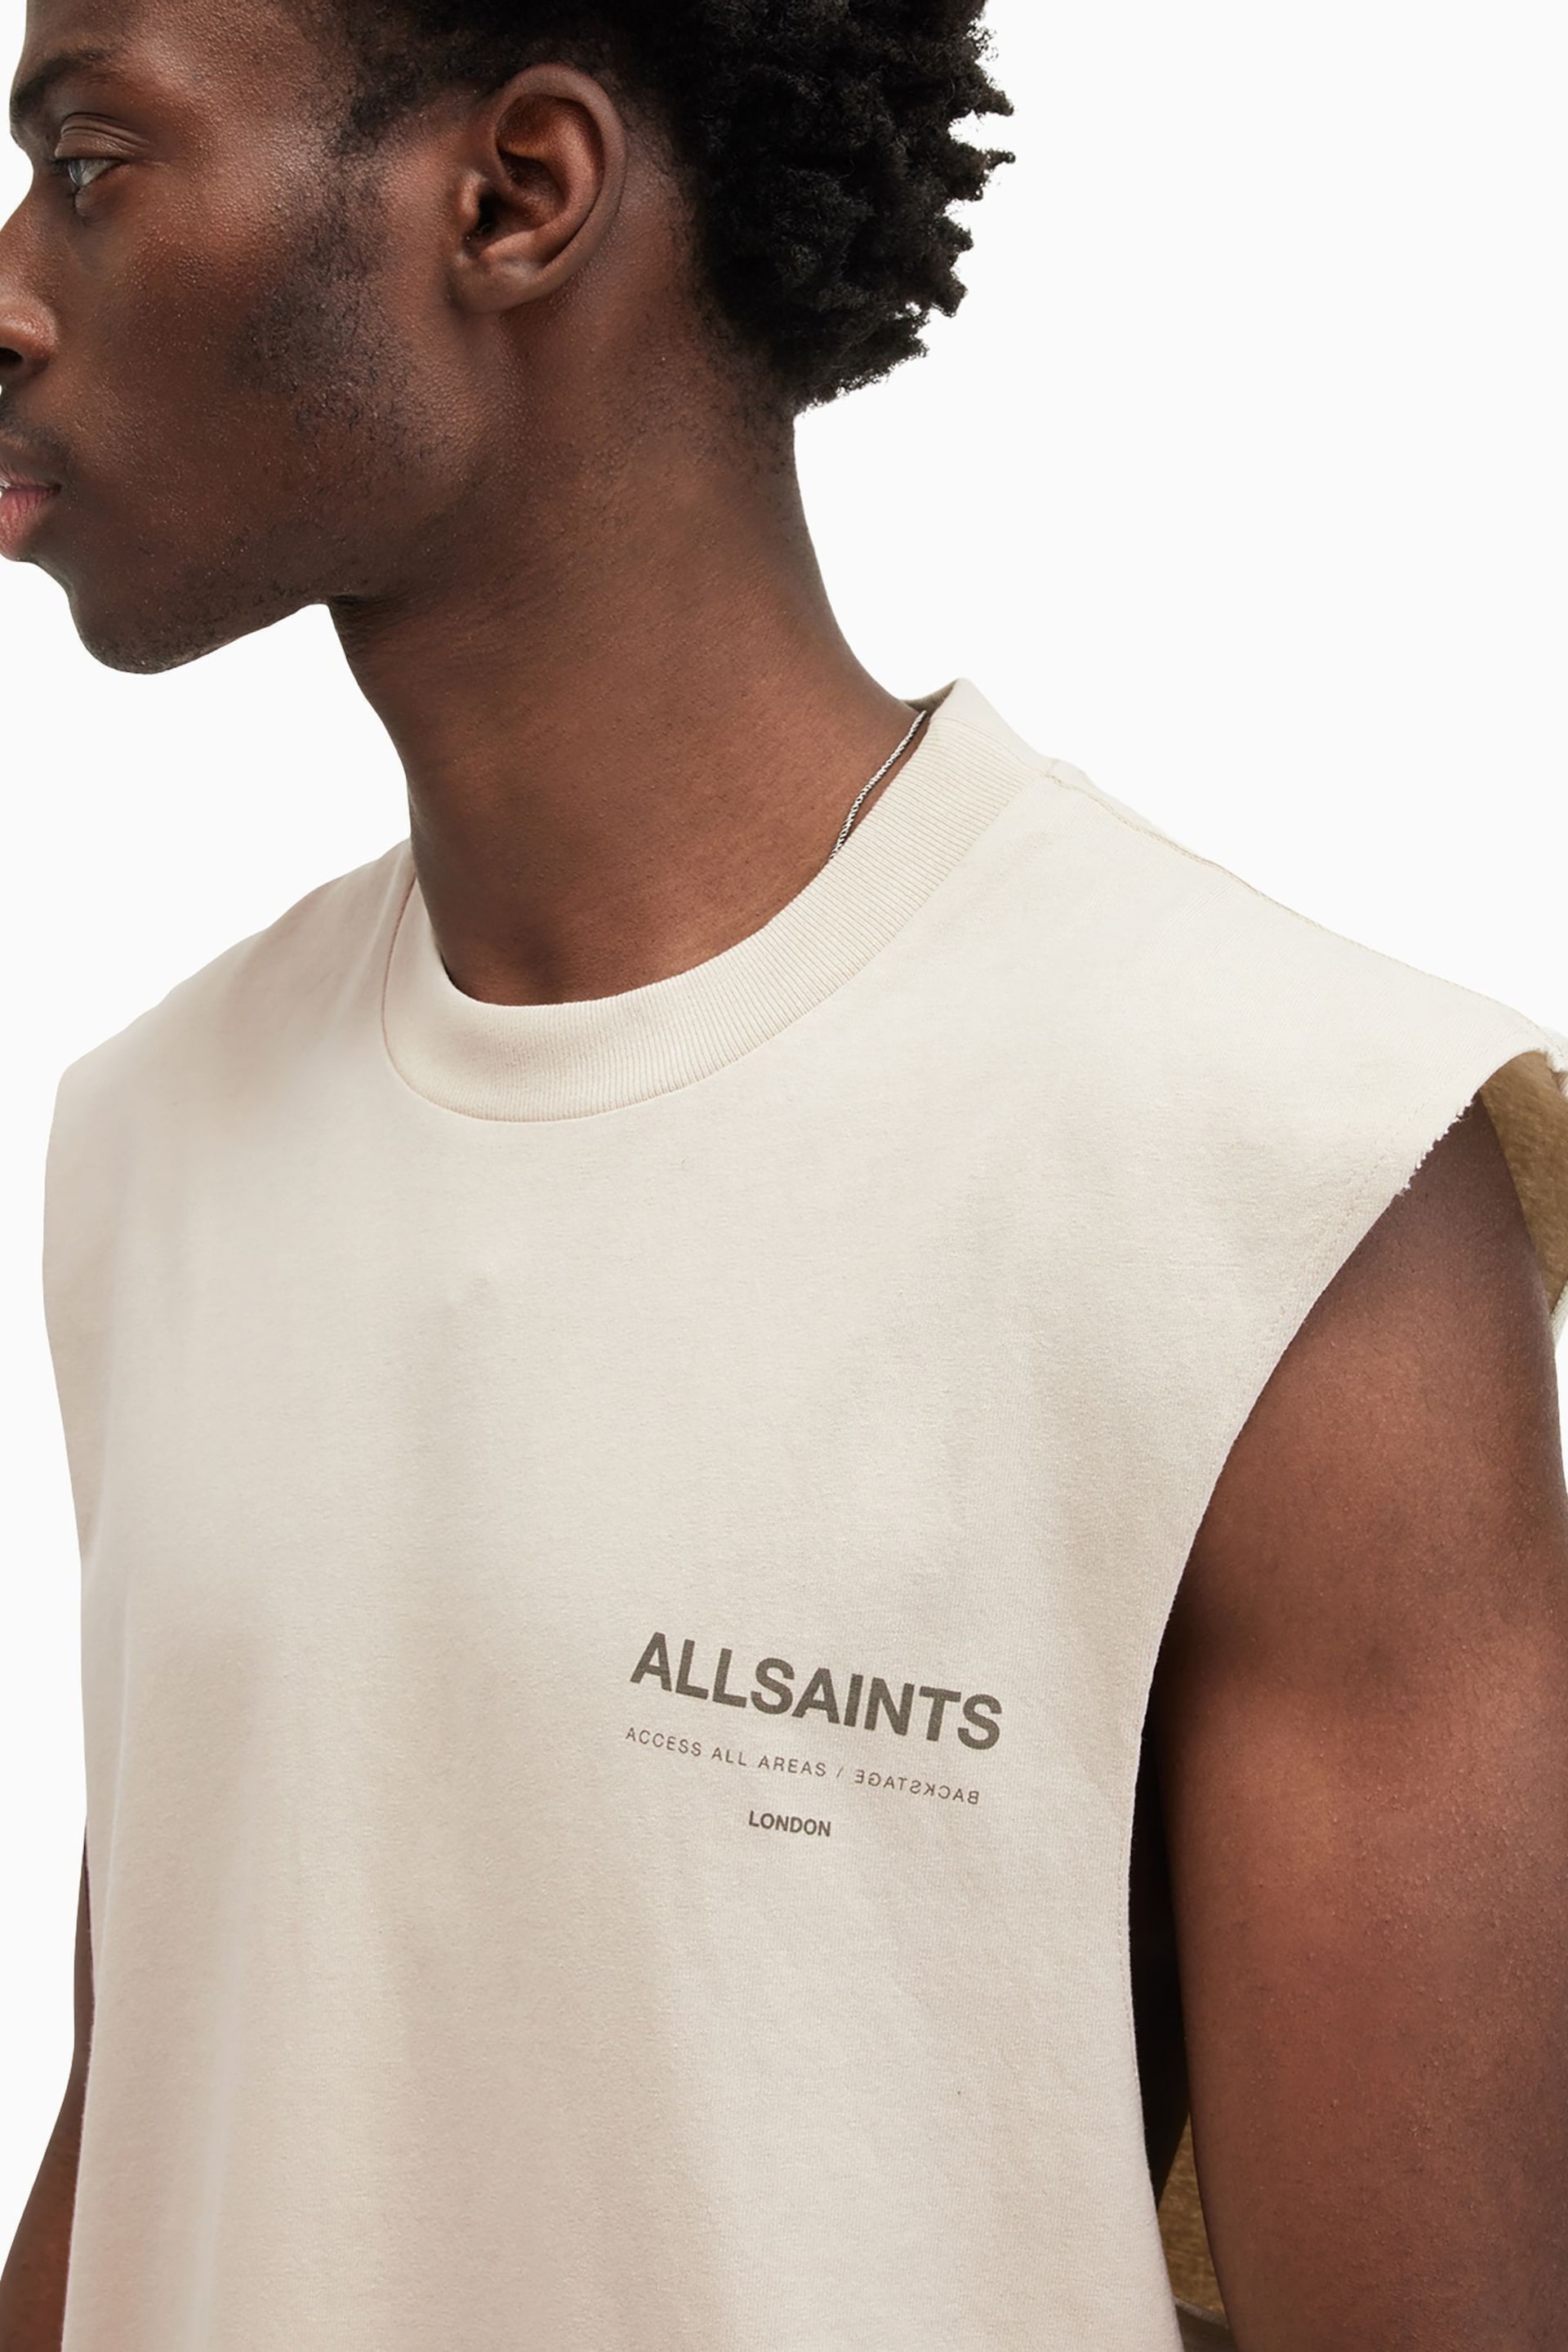 AllSaints Nude Access Short Sleeve Crew T-Shirt - Image 7 of 8